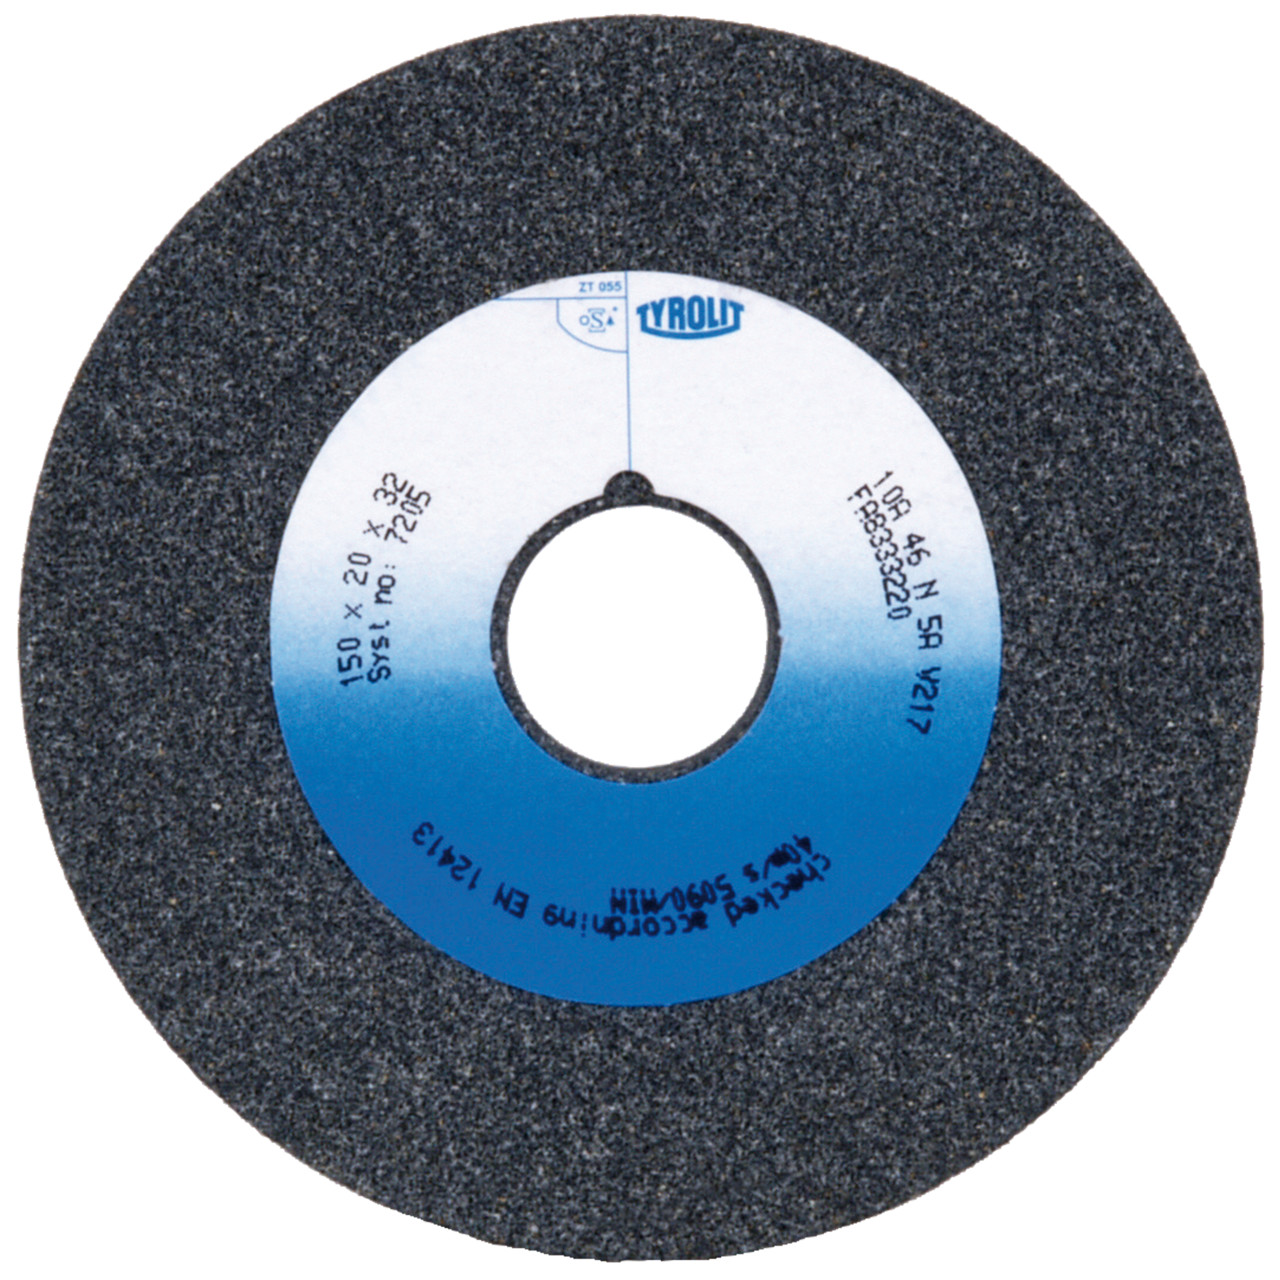 Tyrolit Conventional ceramic grinding discs DxDxH 250x25x32 For unalloyed and low-alloy steels, shape: 1, Art. 3474